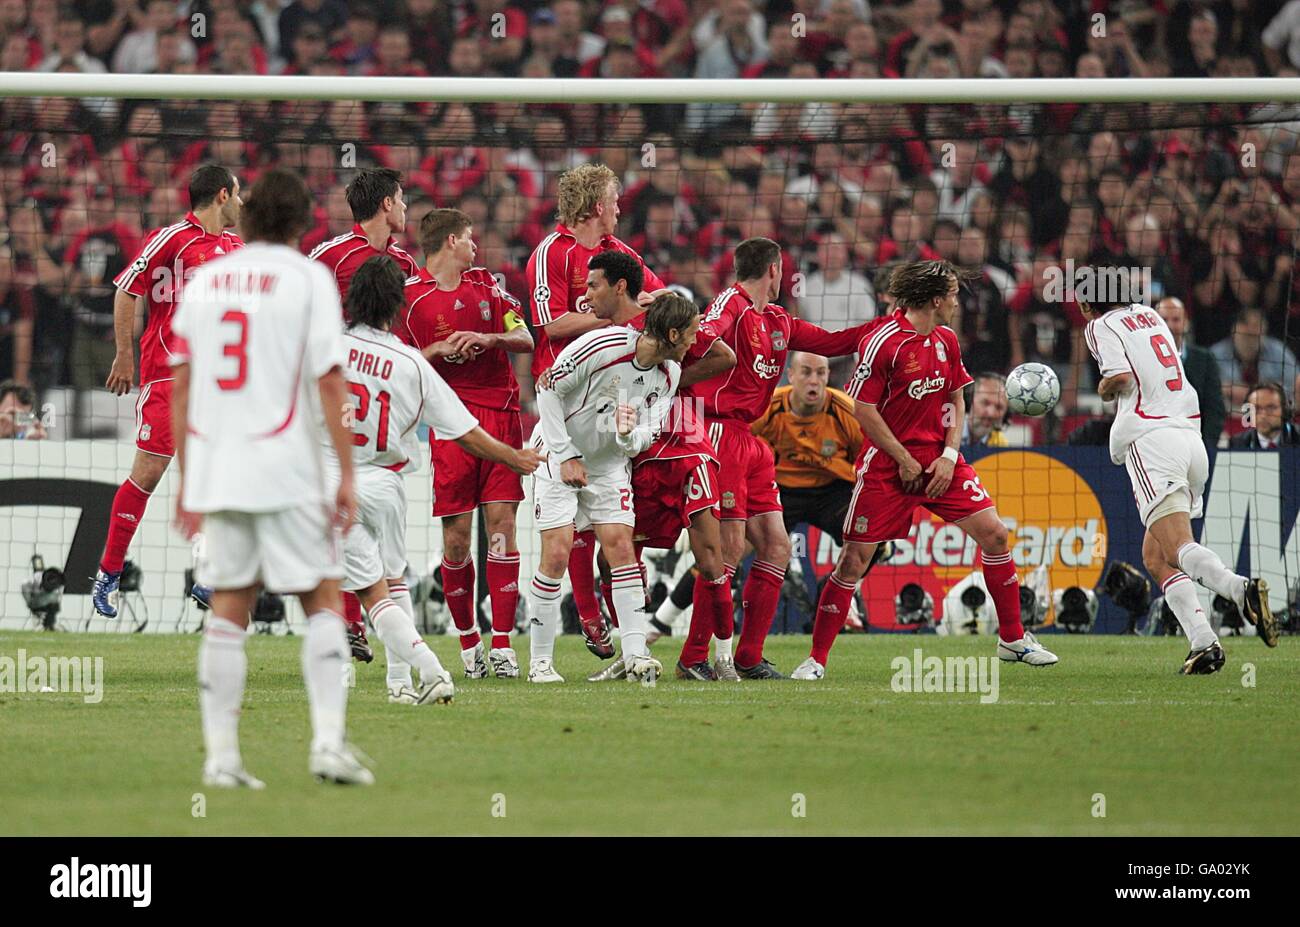 AC Milan's Andrea Pirlo fires in a free-kick which deflects off team mate Filippo Inzaghi (far right), who scores the first goal of the game. Stock Photo